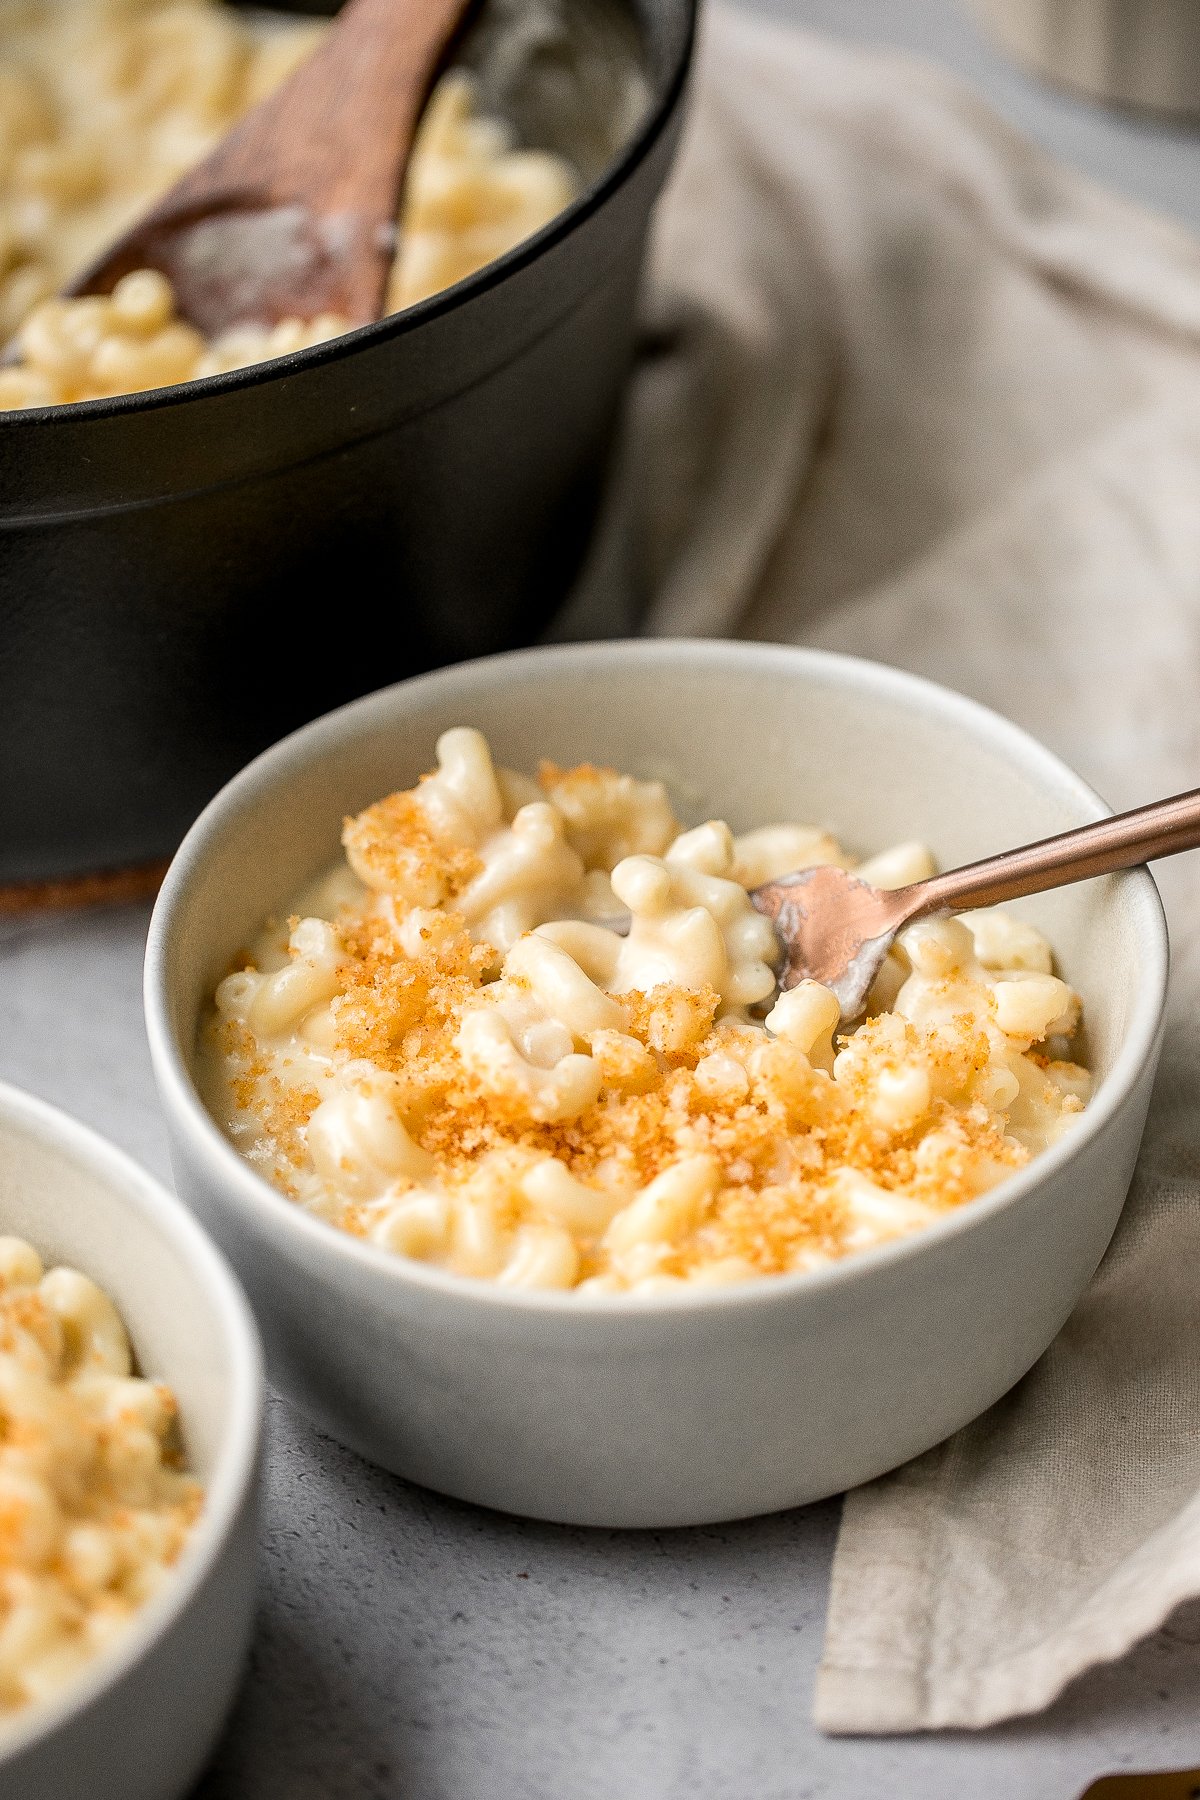 Quick and easy, creamy stovetop mac and cheese with white cheddar is a delicious and comforting one pot 20-minute meal packed with three types of cheese. | aheadofthyme.com